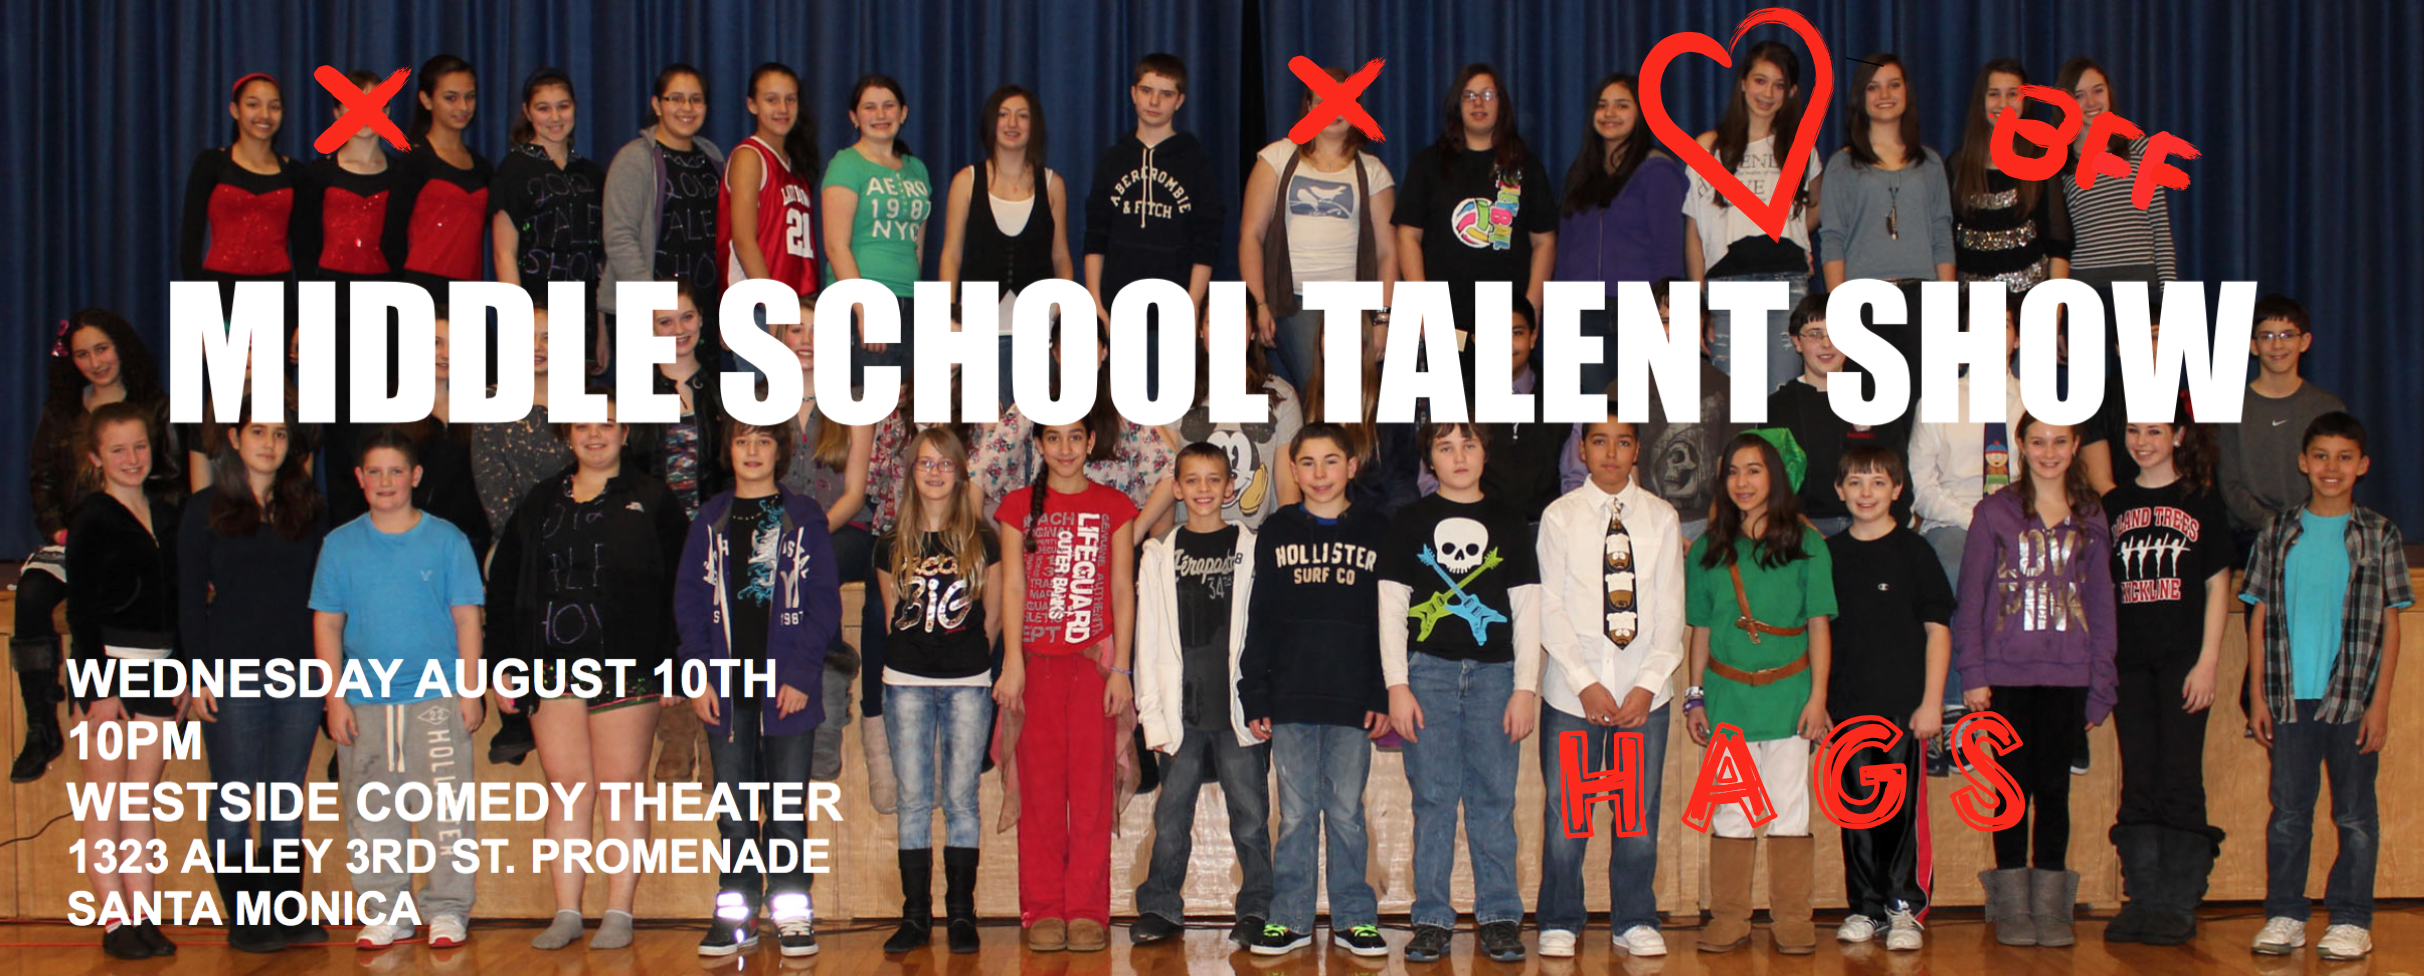 Middle School Talent Show at the Westside Comedy Theatre